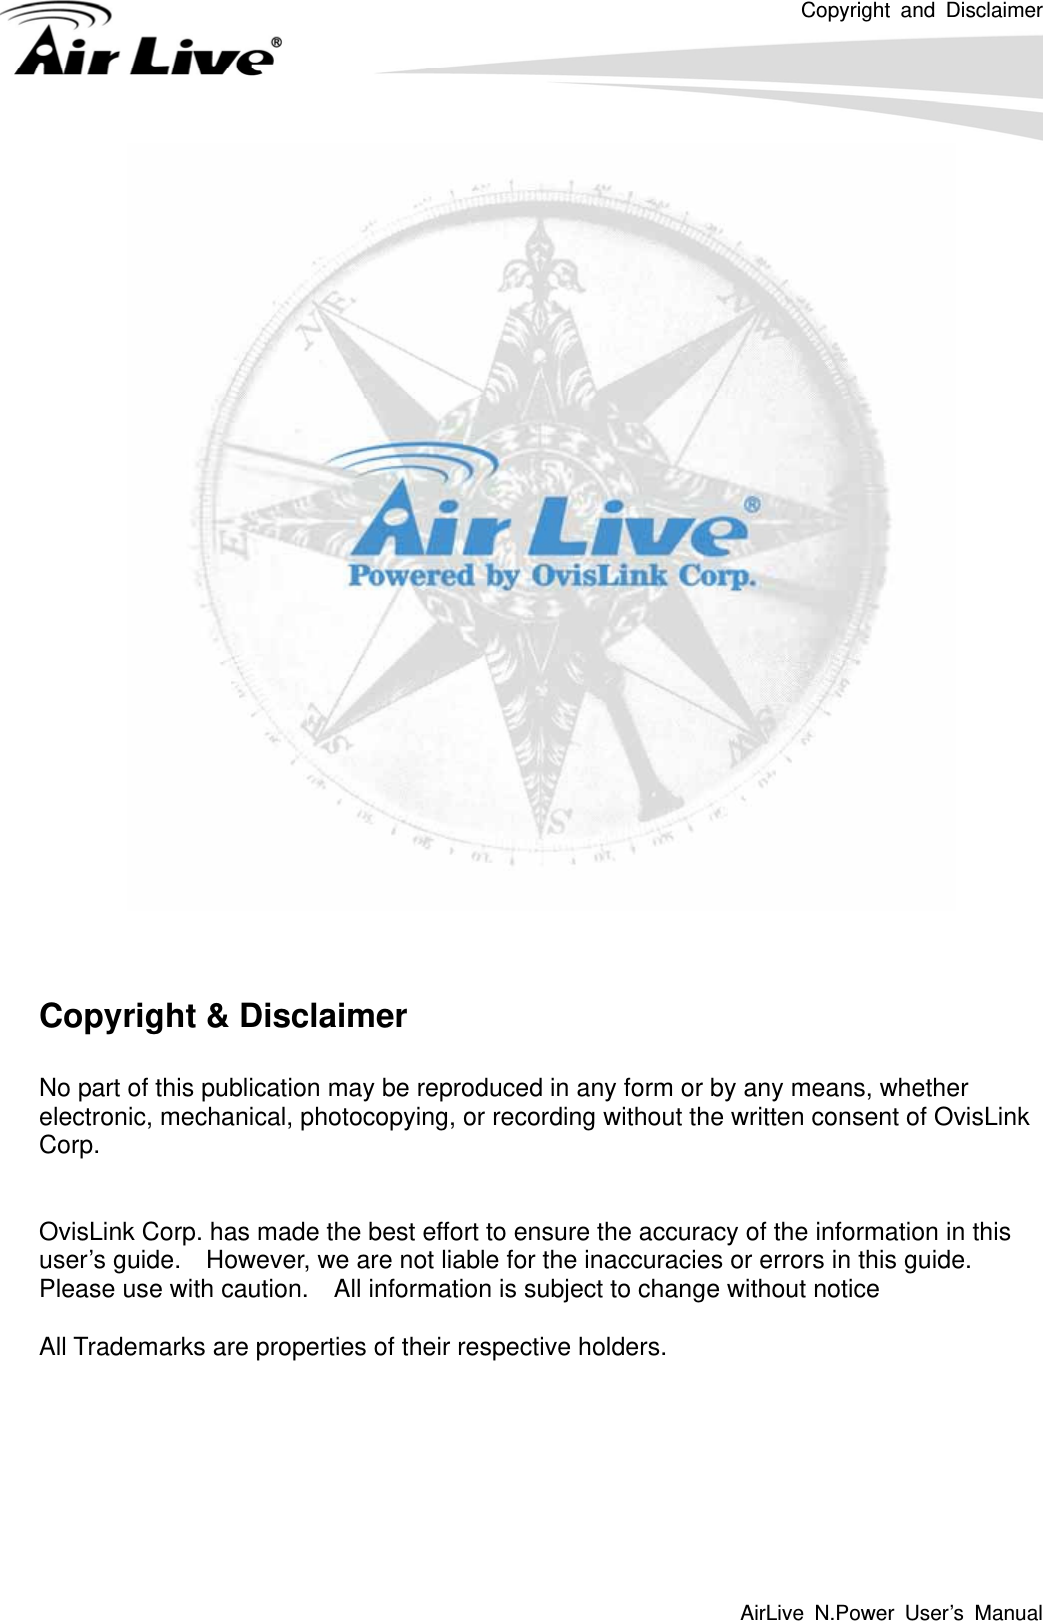 Copyright and Disclaimer AirLive N.Power User’s Manual         Copyright &amp; Disclaimer  No part of this publication may be reproduced in any form or by any means, whether electronic, mechanical, photocopying, or recording without the written consent of OvisLink Corp.    OvisLink Corp. has made the best effort to ensure the accuracy of the information in this user’s guide.    However, we are not liable for the inaccuracies or errors in this guide.   Please use with caution.    All information is subject to change without notice  All Trademarks are properties of their respective holders.       